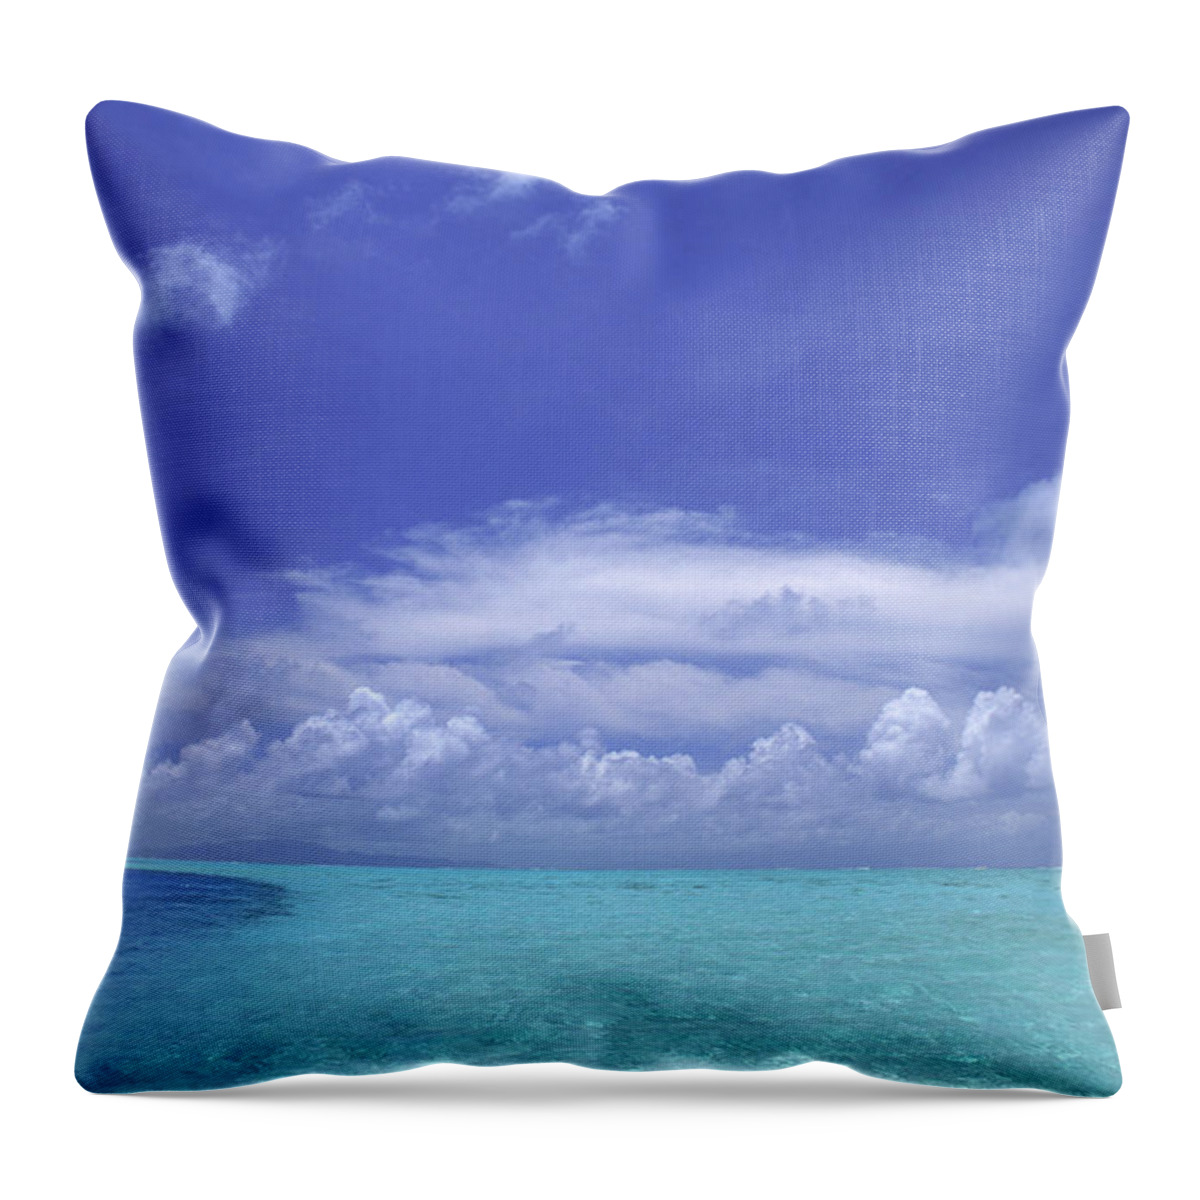 Tranquility Throw Pillow featuring the photograph Water And Sky, Bora Bora, Pacific by Mitch Diamond